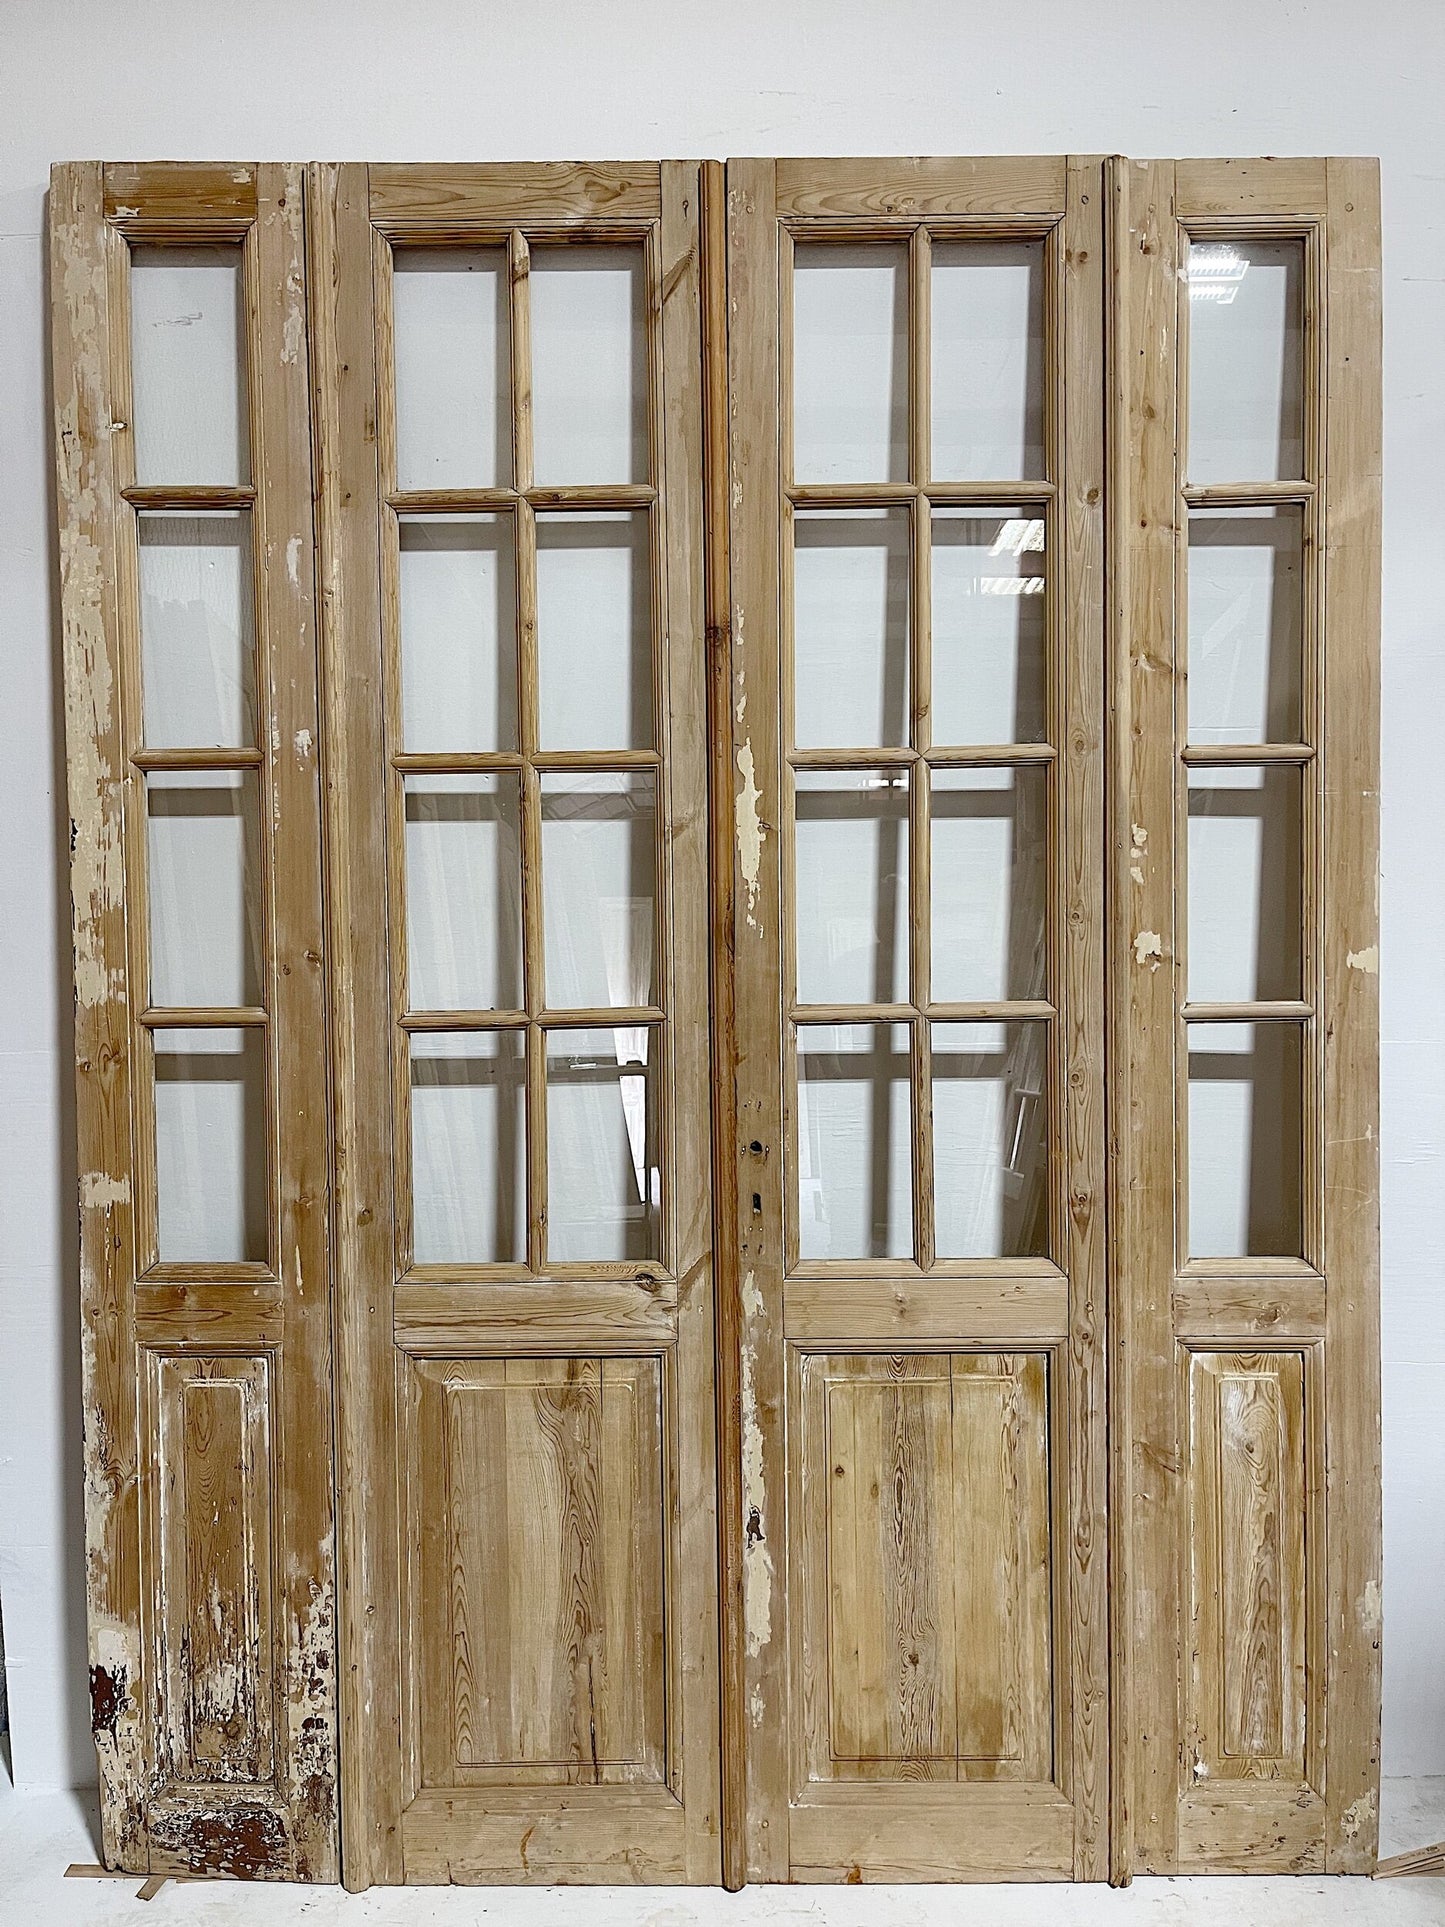 Antique French doors (99x75) with glass, 4 piece set E1130